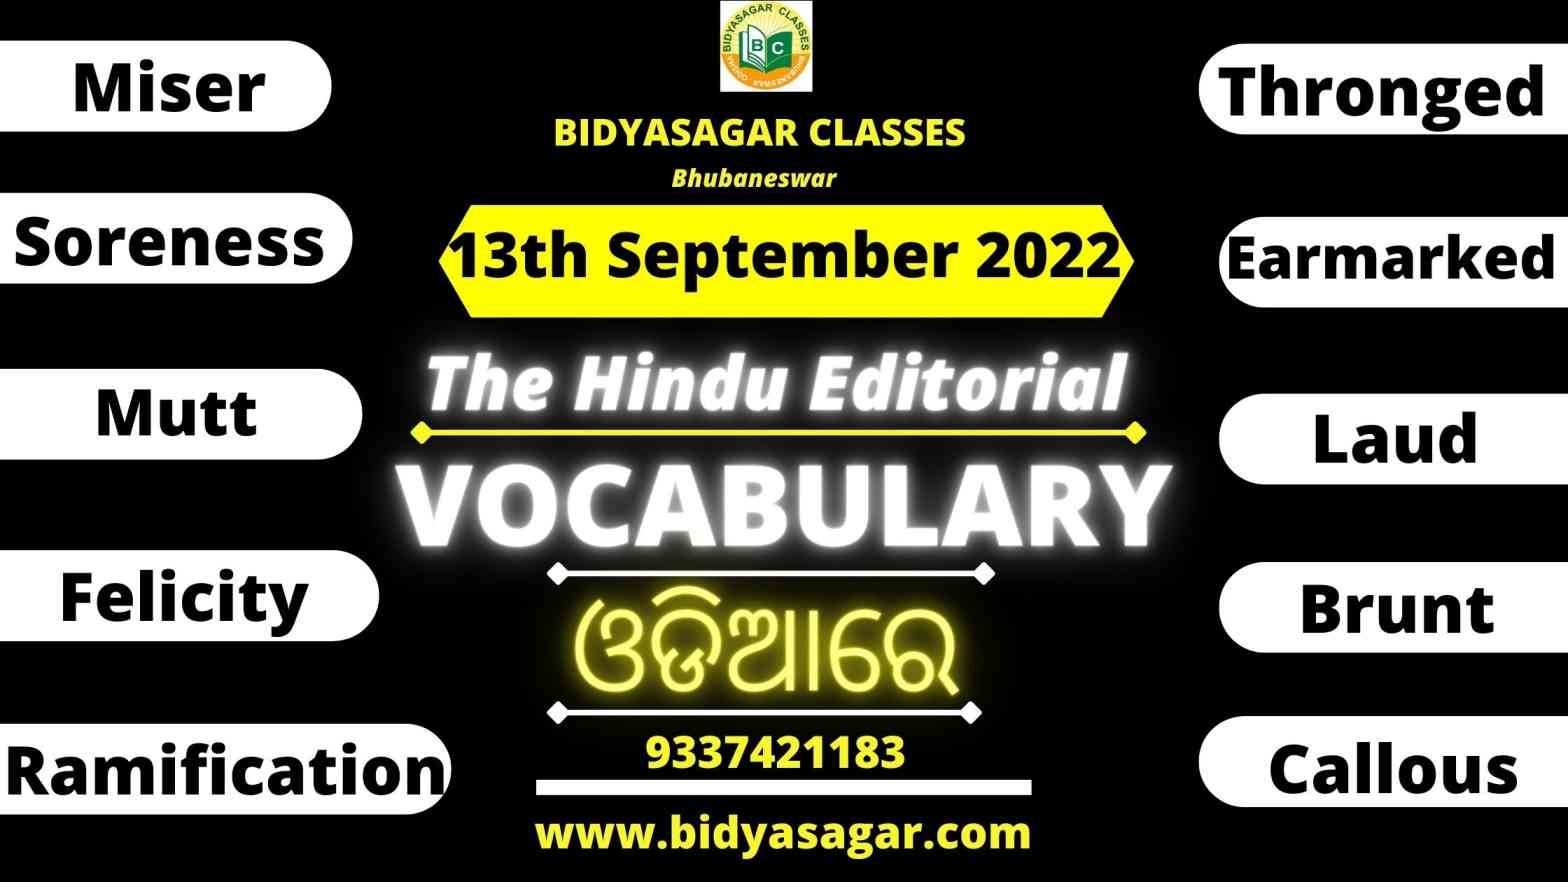 The Hindu Editorial Vocabulary of 13th September 2022